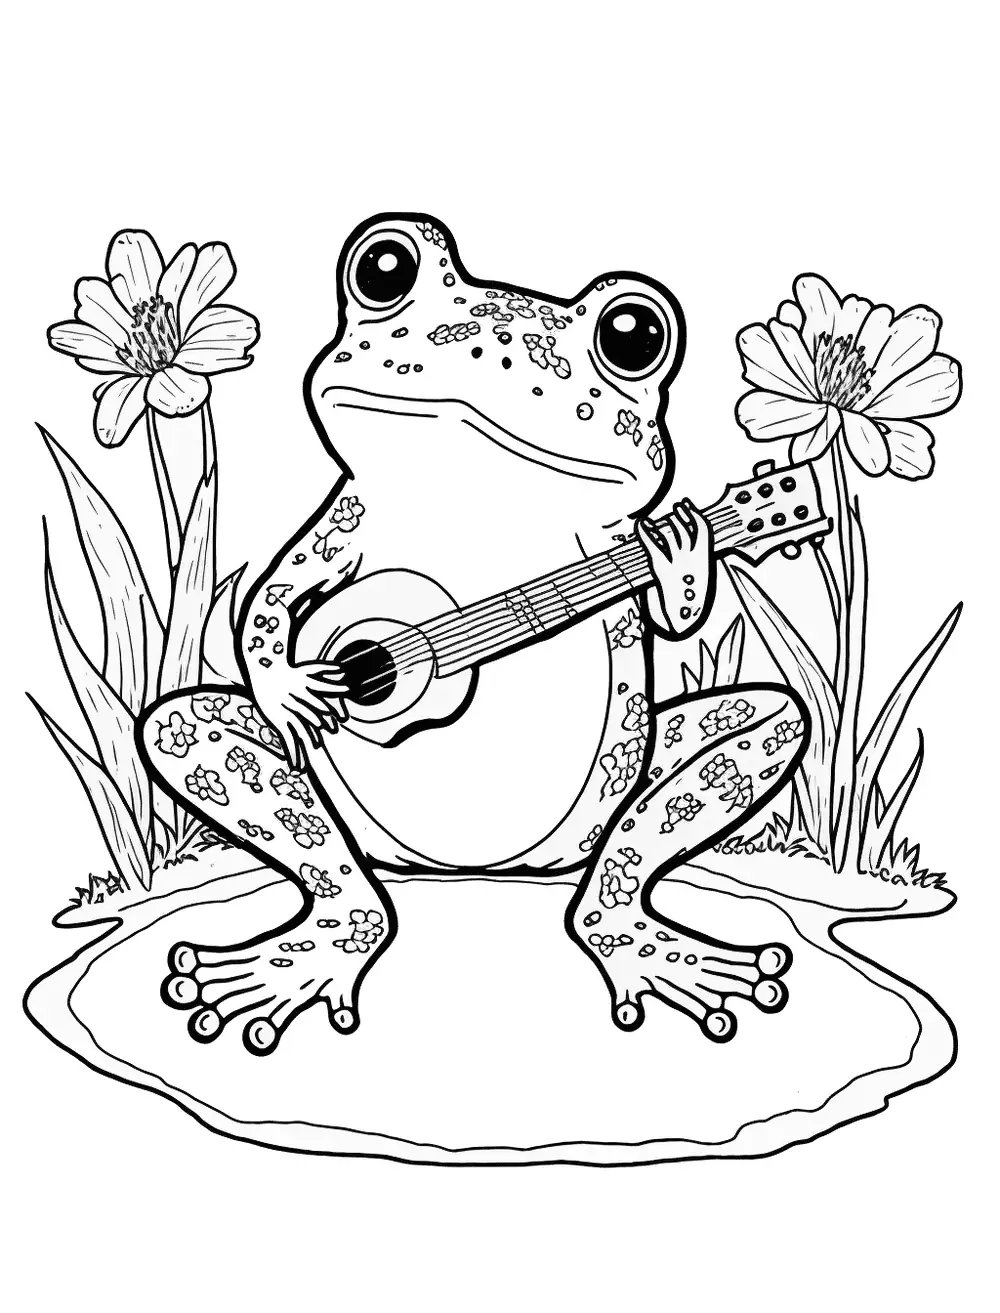 Frog Playing An Instrument Coloring Page - A frog playing a musical instrument, like a guitar or trumpet